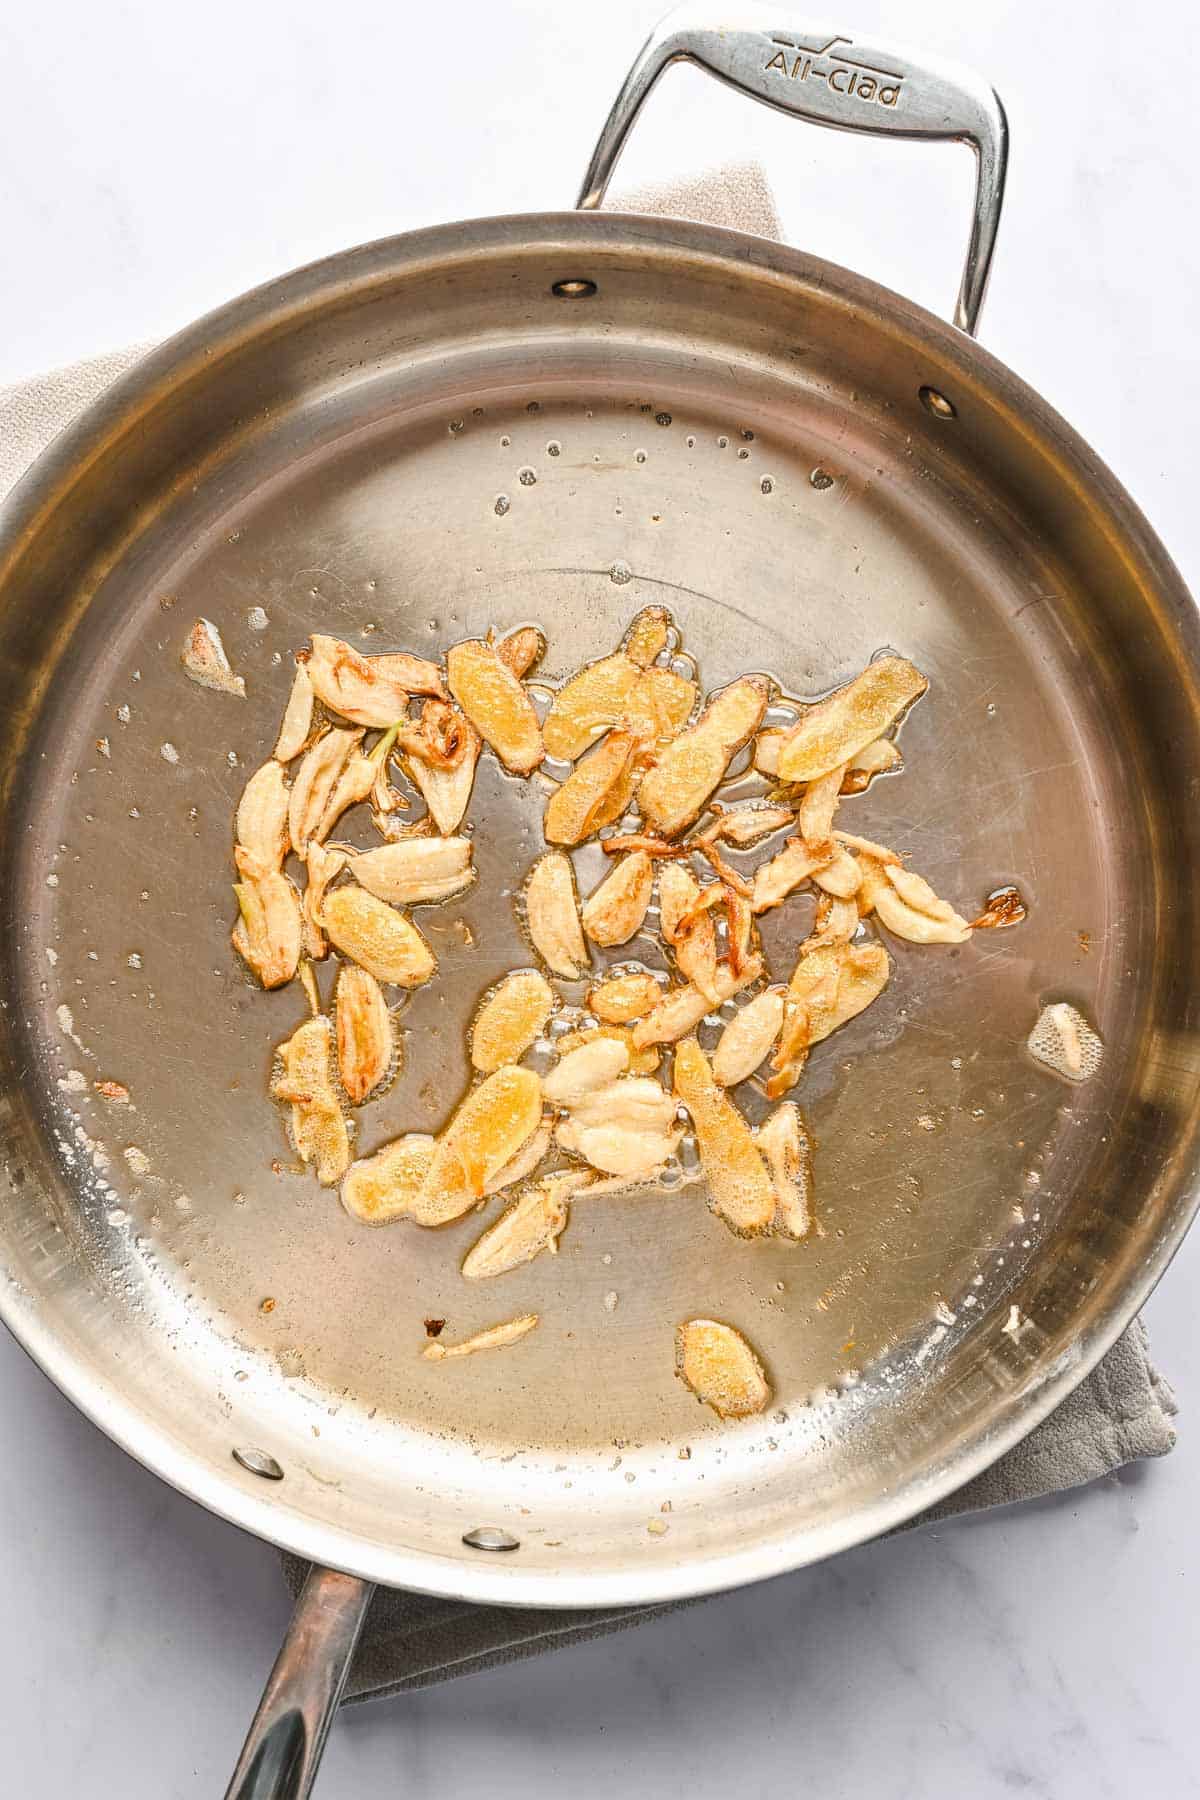 Overhead view of smashed garlic cloves sauteing in a metal skillet.